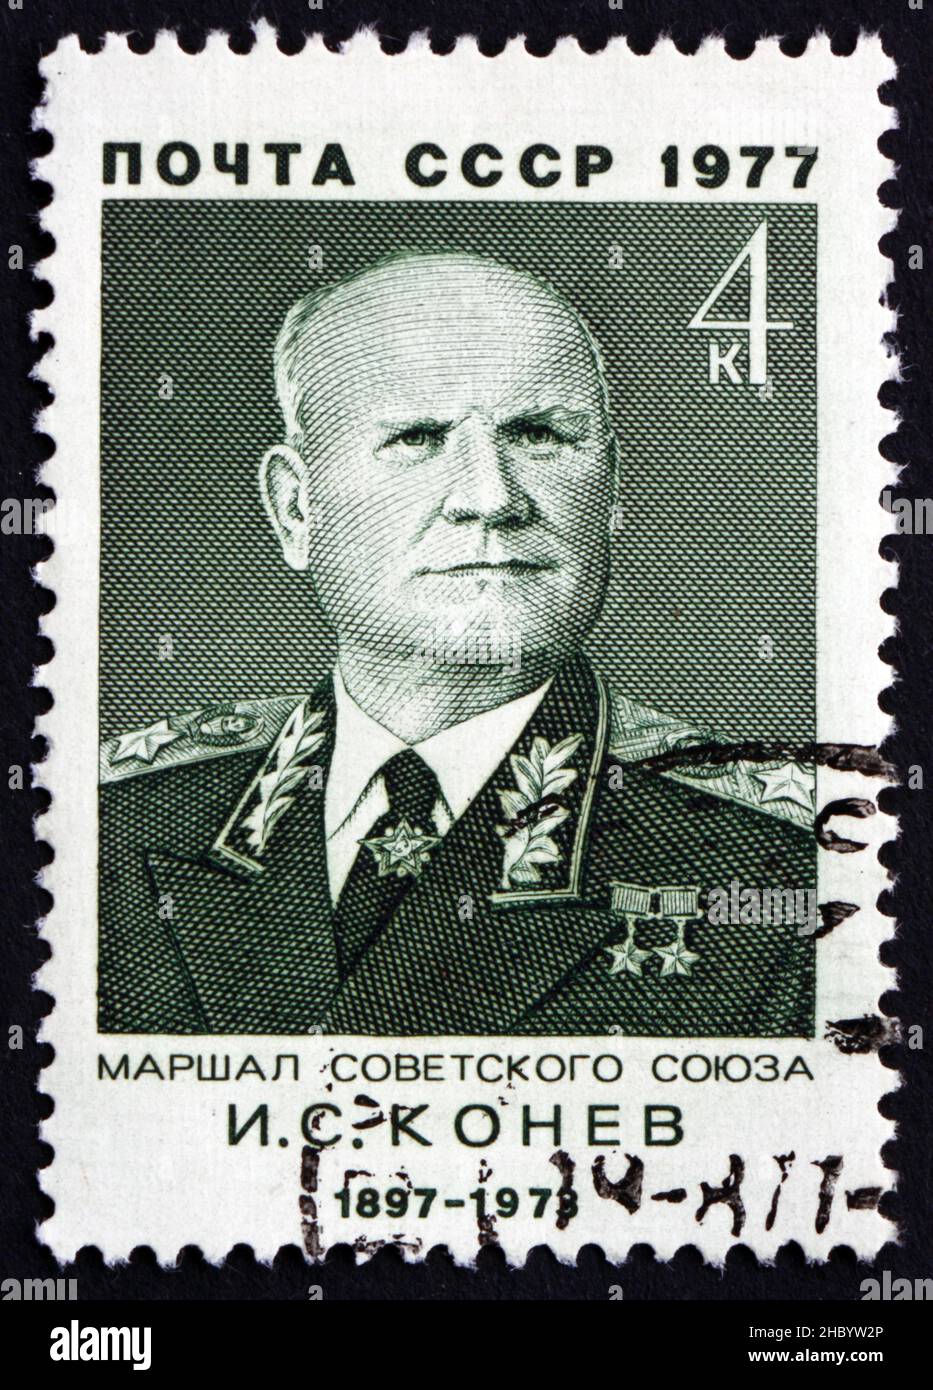 RUSSIA - CIRCA 1977: a stamp printed in the Russia shows Ivan Stepanovich Konev, Marshal of the Soviet Union, circa 1977 Stock Photo